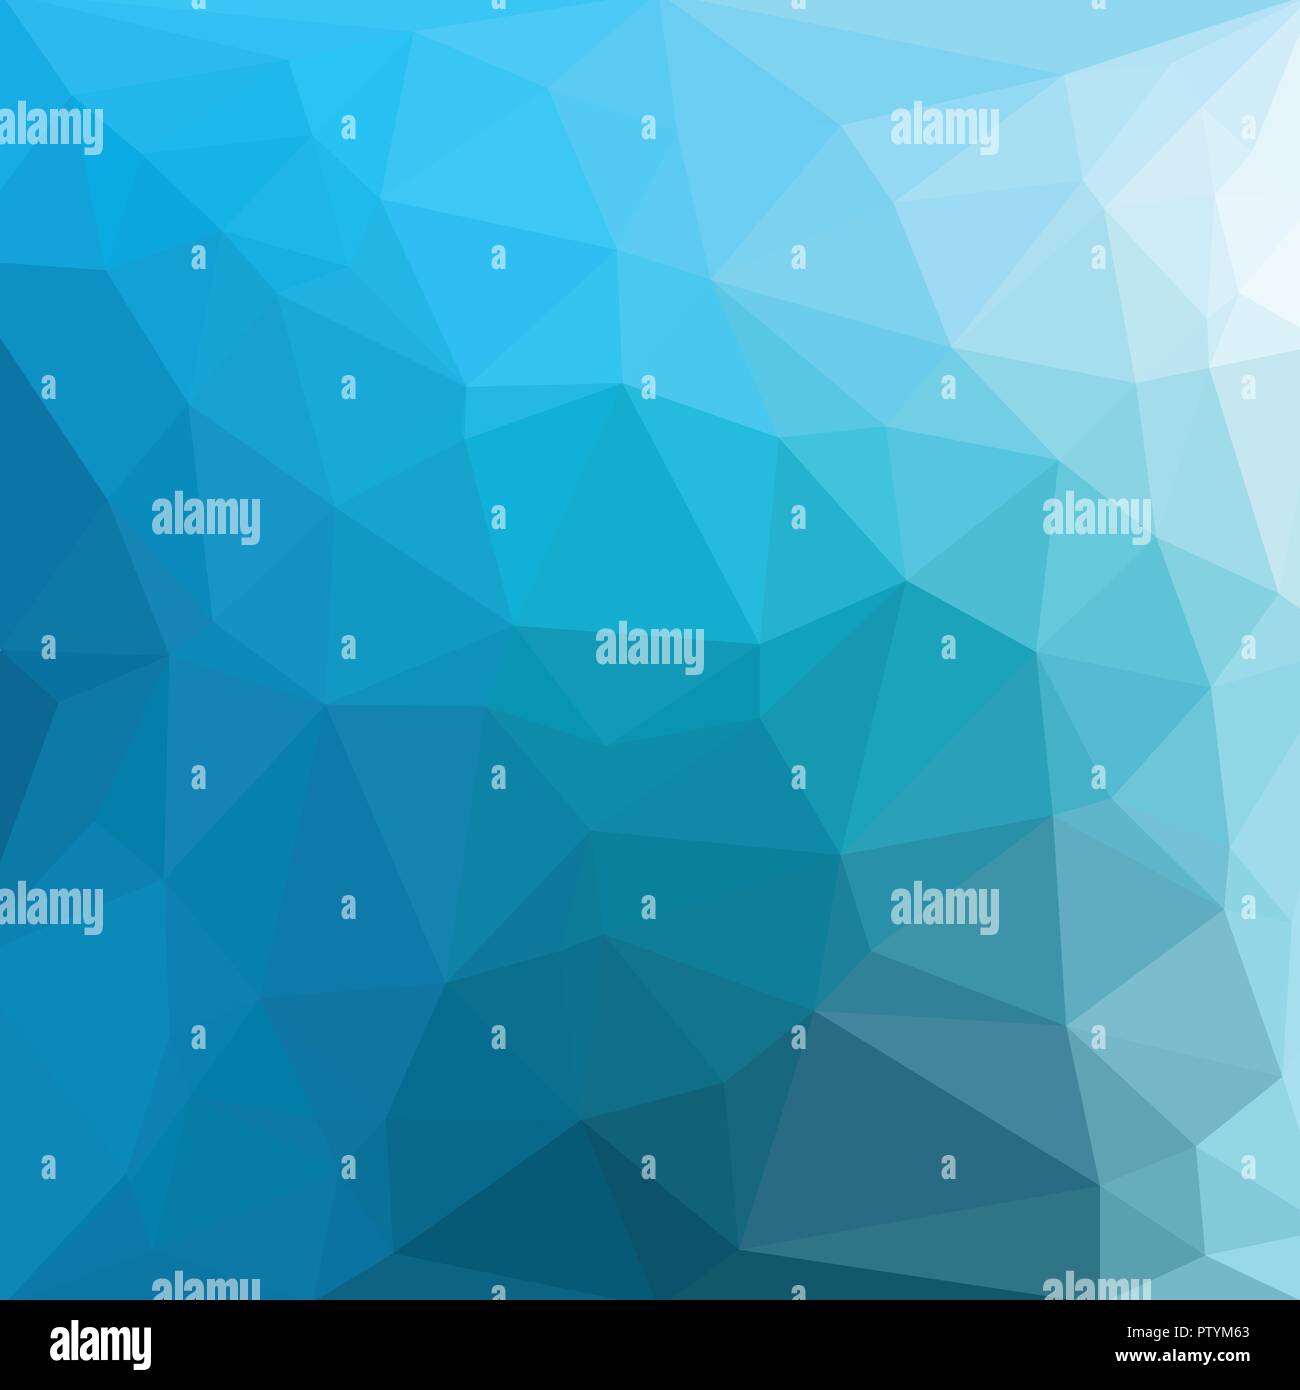 Light blue cool vector Low poly crystal background. Polygon design pattern. Low poly illustration background. Stock Vector